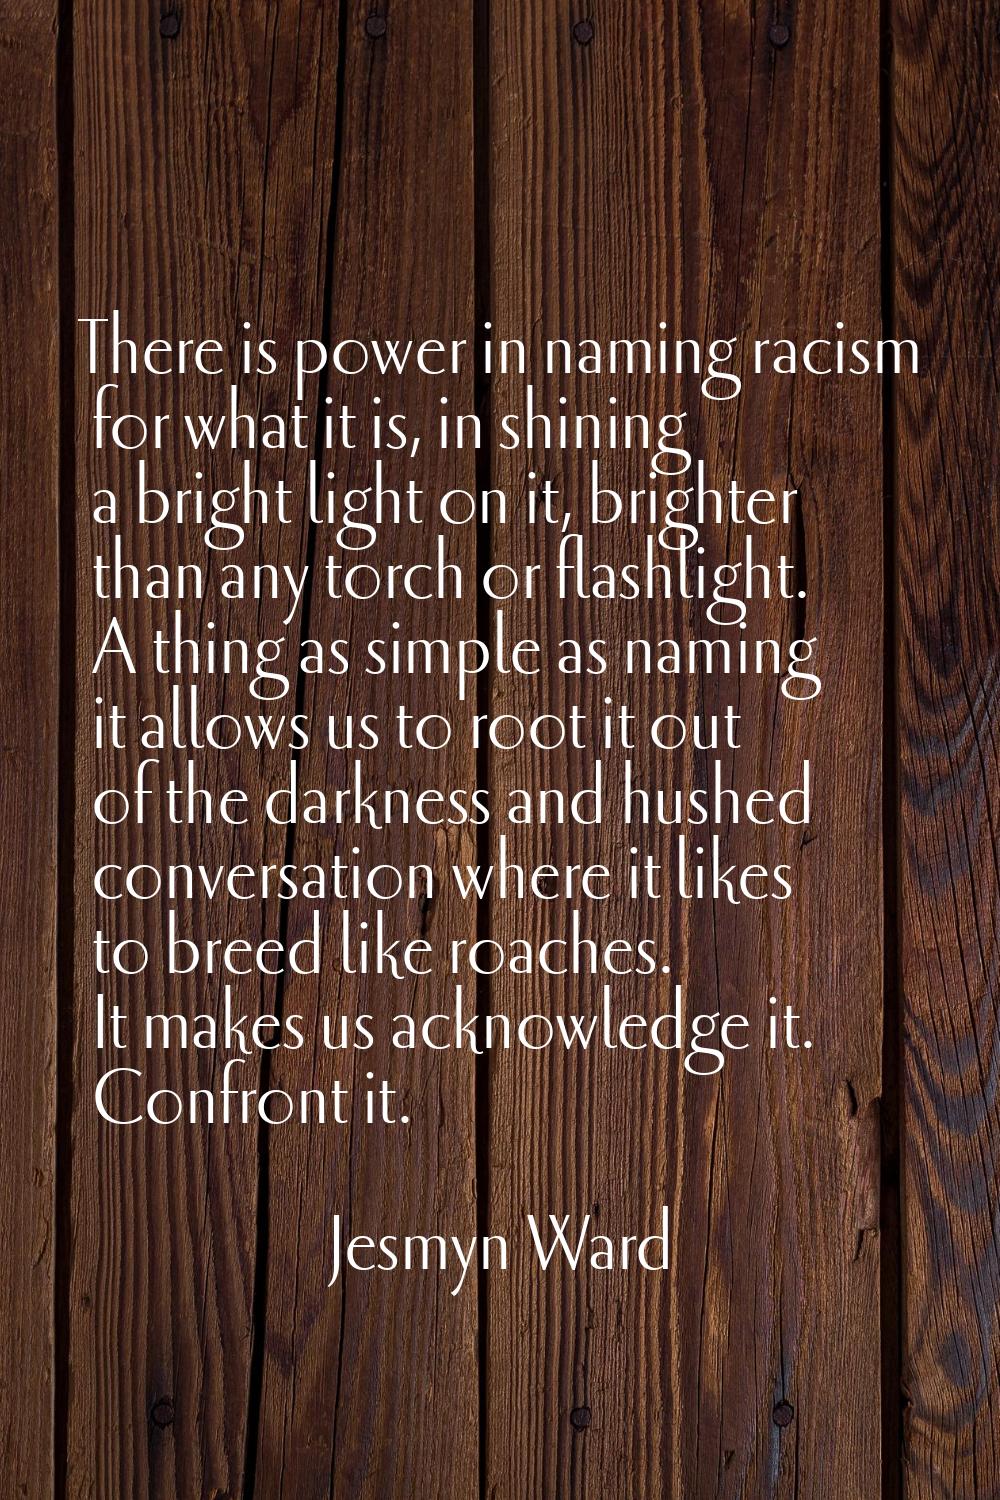 There is power in naming racism for what it is, in shining a bright light on it, brighter than any 